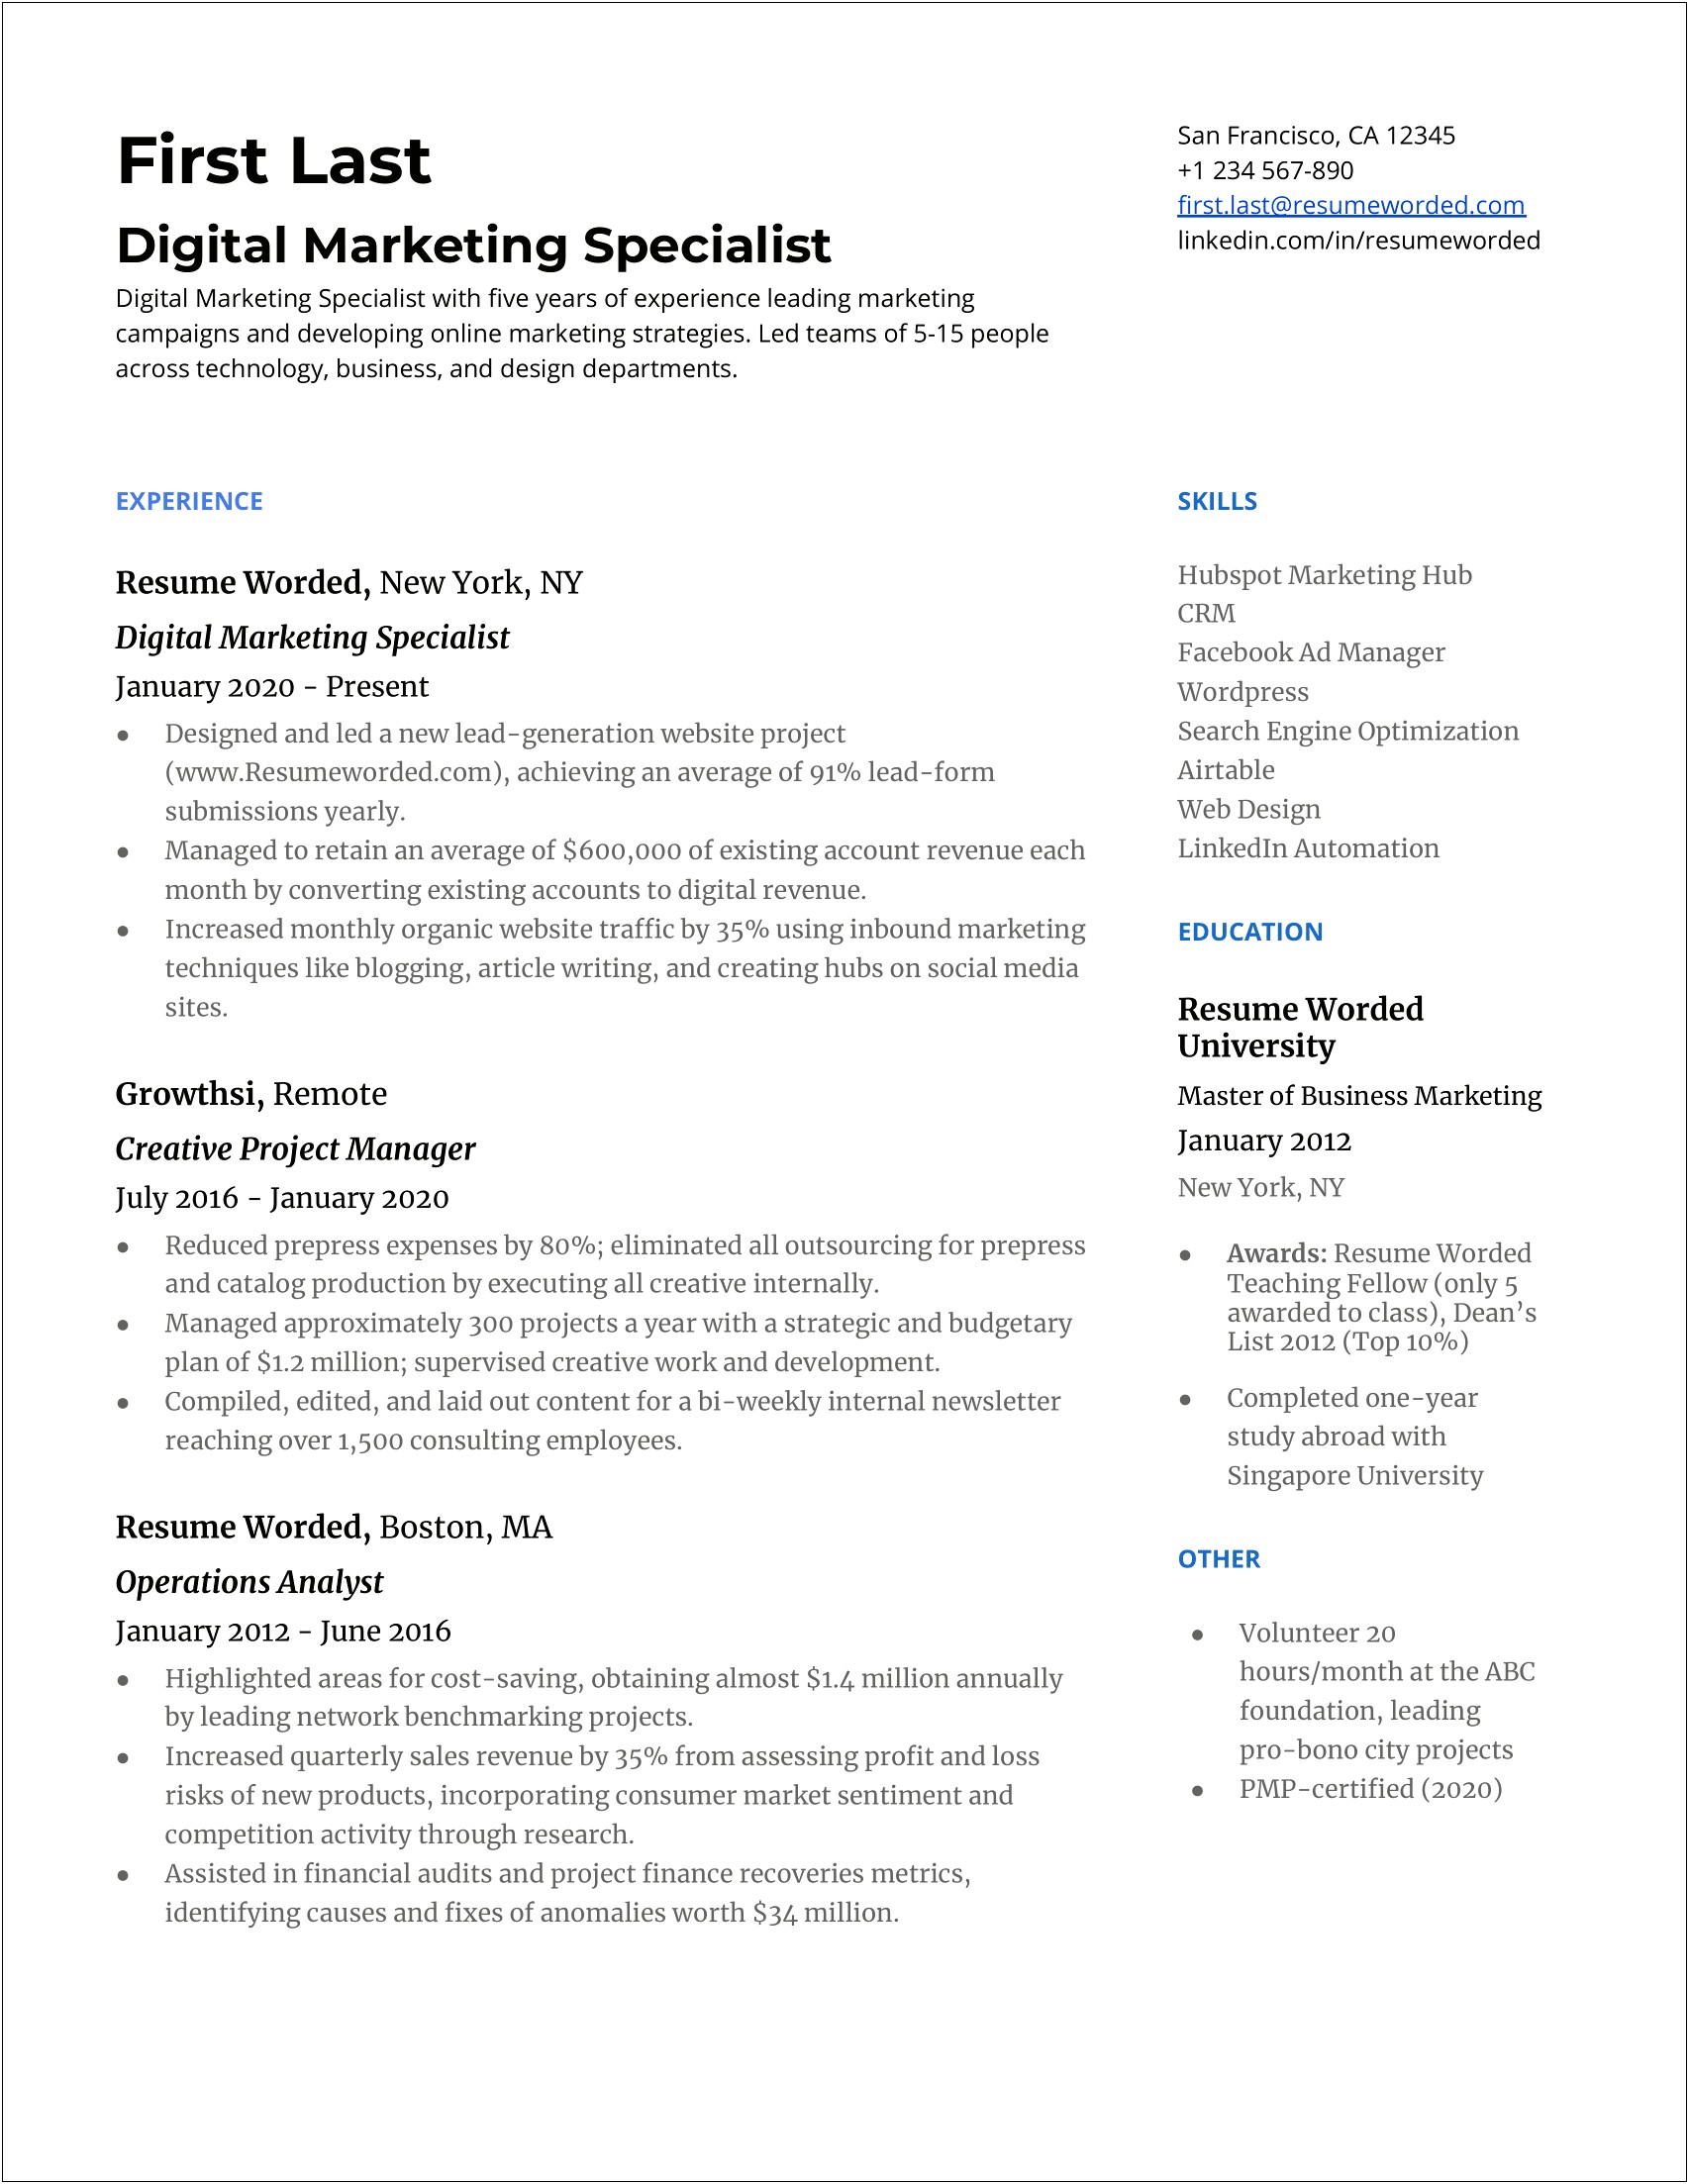 Seo Analyst Resume For 2 Years Experience